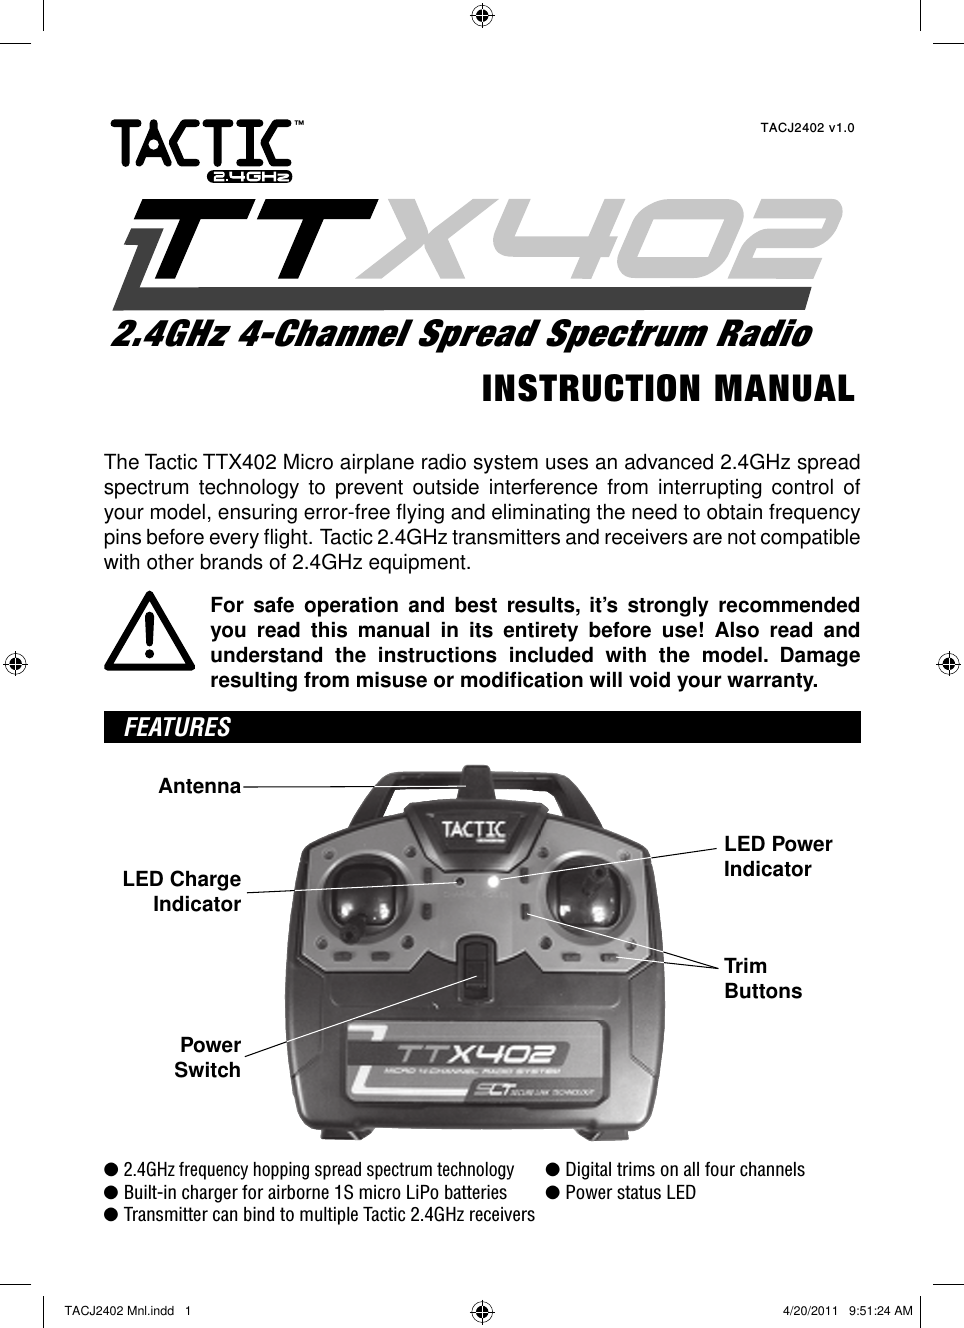 The Tactic TTX402 Micro airplane radio system uses an advanced 2.4GHz spread spectrum technology to prevent outside interference from interrupting control of your model, ensuring error-free ﬂ ying and eliminating the need to obtain frequency pins before every ﬂ ight.  Tactic 2.4GHz transmitters and receivers are not compatible with other brands of 2.4GHz equipment.For safe operation and best results, it’s strongly recommended you read this manual in its entirety before use! Also read and understand the instructions included with the model. Damage resulting from misuse or modiﬁ cation will void your warranty. FEATURESAntennaTrimButtonsLED ChargeIndicatorPowerSwitchLED PowerIndicator● 2.4GHz frequency hopping spread spectrum technology ● Digital trims on all four channels● Built-in charger for airborne 1S micro LiPo batteries  ● Power status LED● Transmitter can bind to multiple Tactic 2.4GHz receiversINSTRUCTION MANUALTACJ2402 v1.02.4GHz 4-Channel Spread Spectrum Radio™TACJ2402 Mnl.indd   1TACJ2402 Mnl.indd   1 4/20/2011   9:51:24 AM4/20/2011   9:51:24 AM